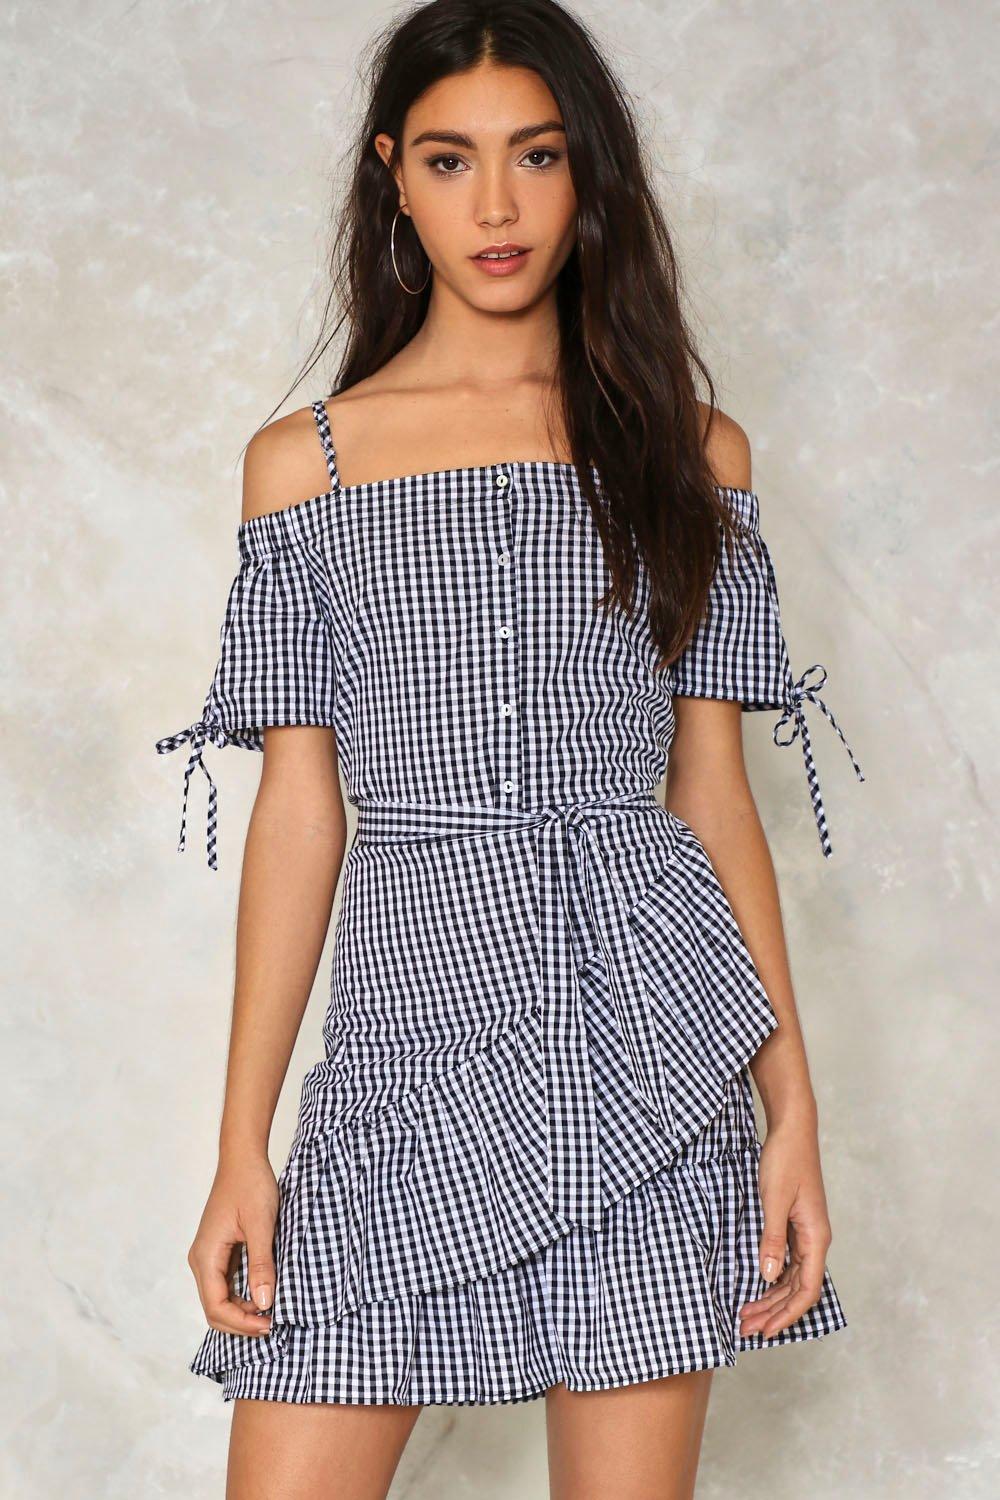 Square to Dance Gingham Dress